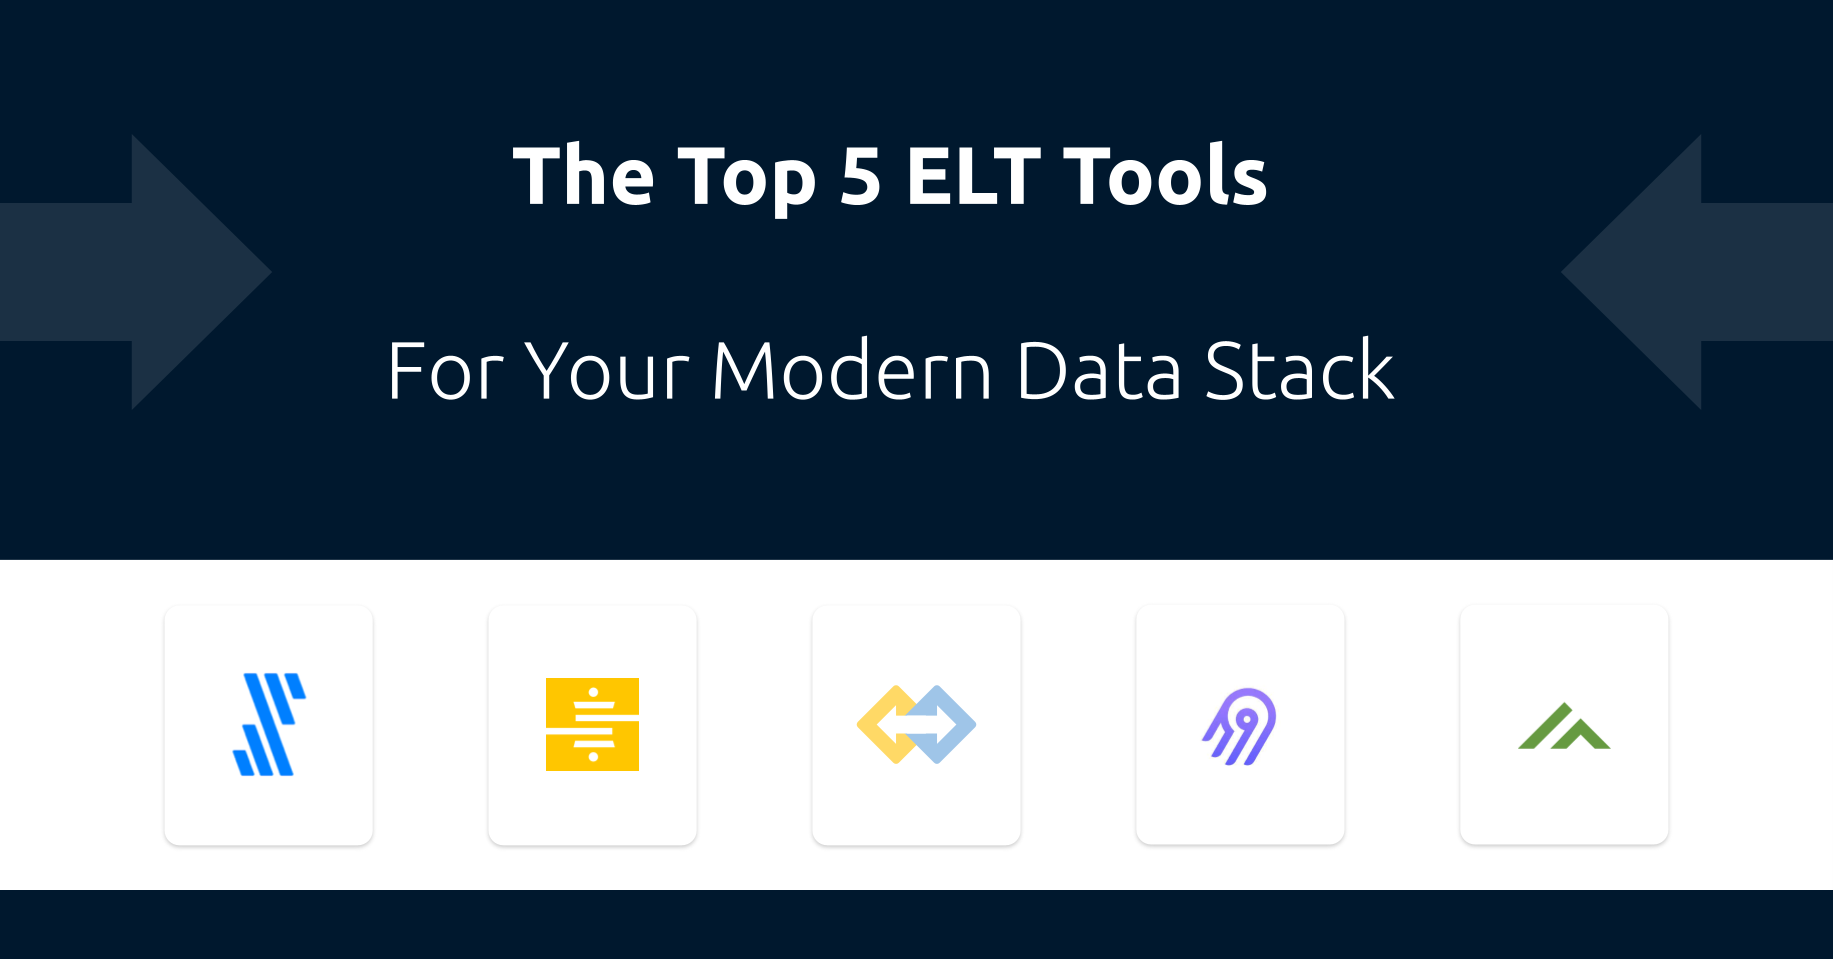 The Top 5 ELT Tools for The Modern Data Stack